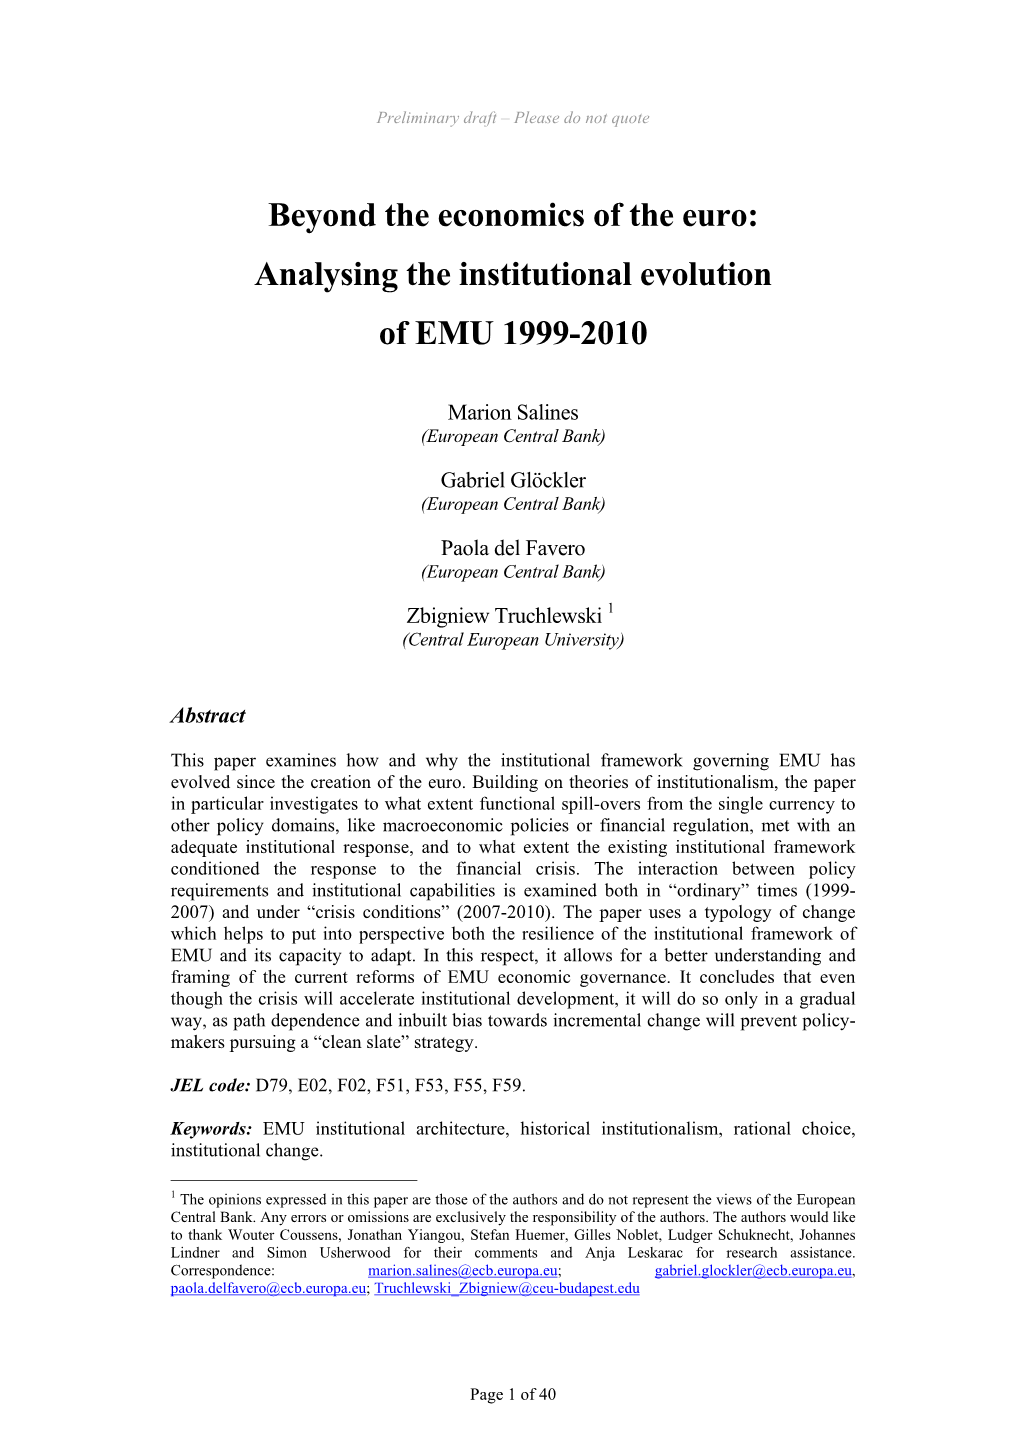 Beyond the Economics of the Euro: Analysing the Institutional Evolution of EMU 1999-2010